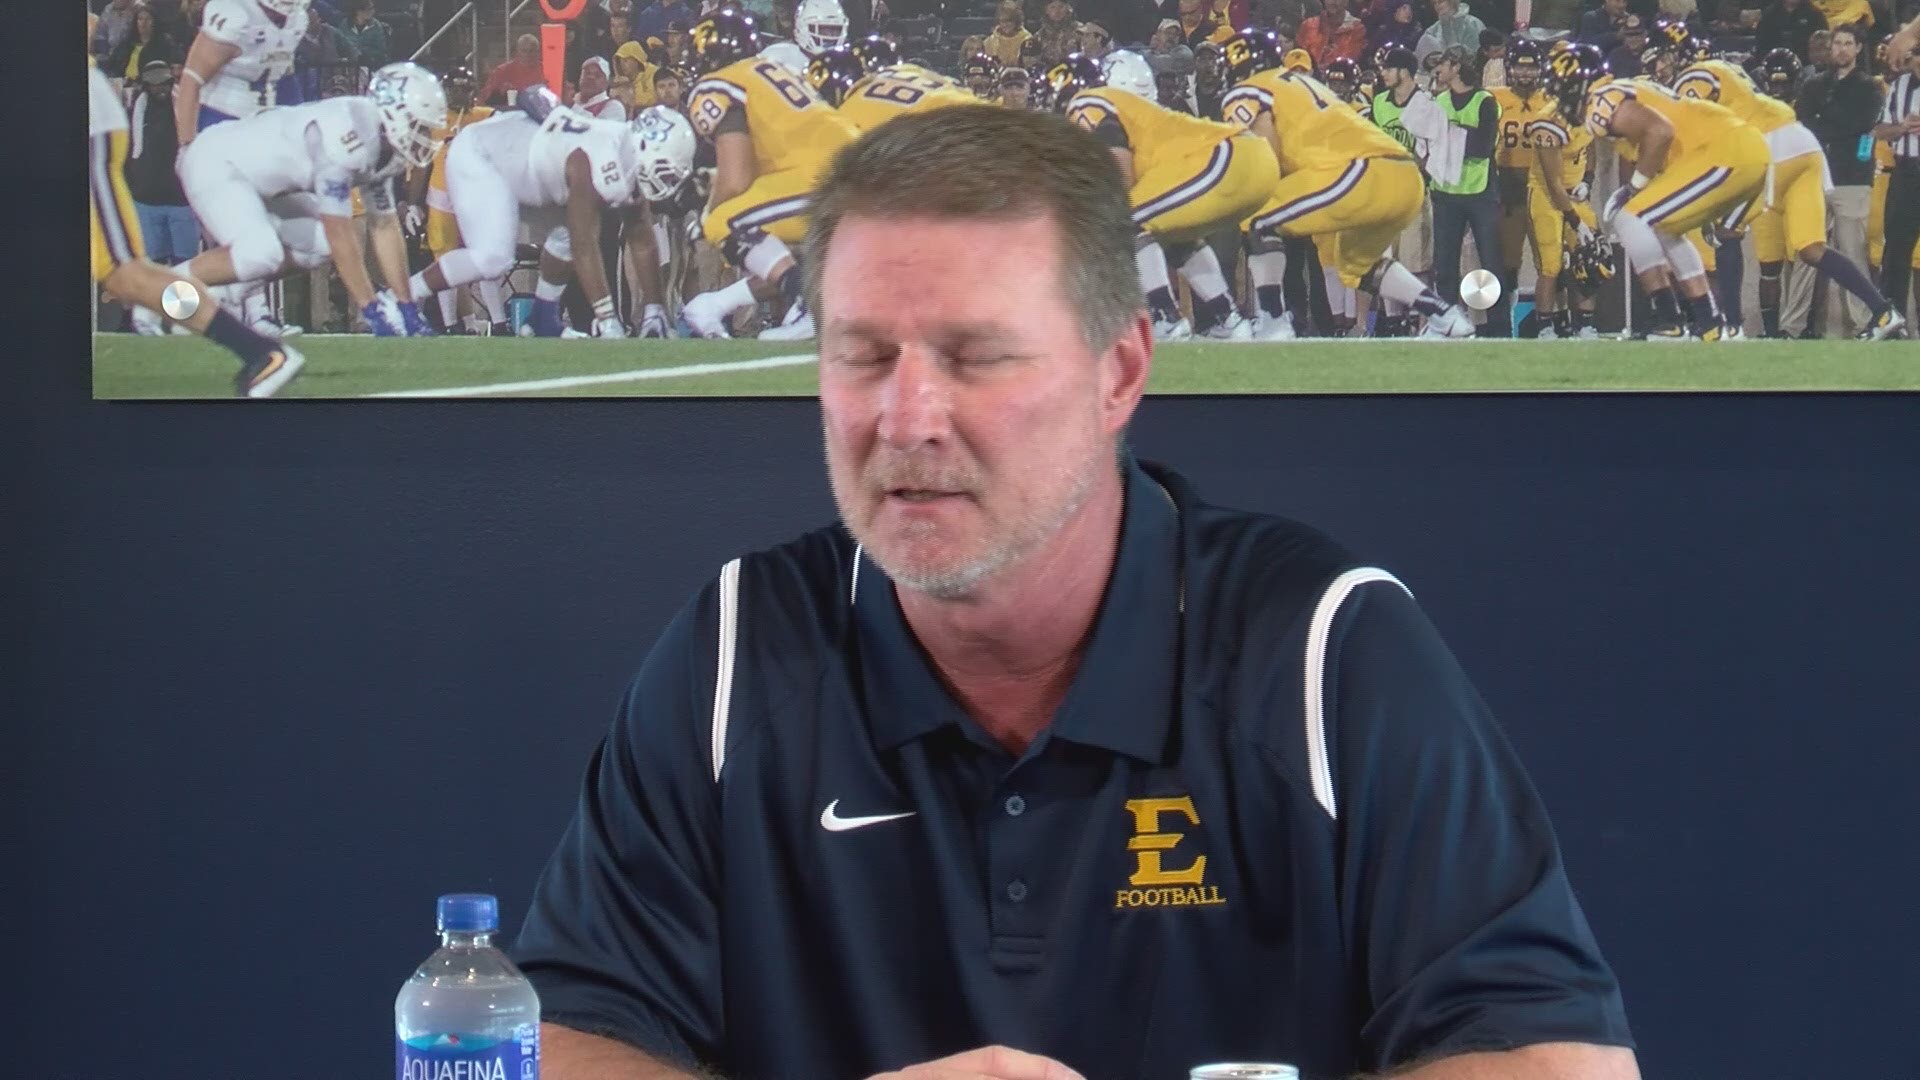 ETSU head coach (and former Vol) Randy Sanders comments on what he'll do if the Buccaneers beat the Vols on Saturday.